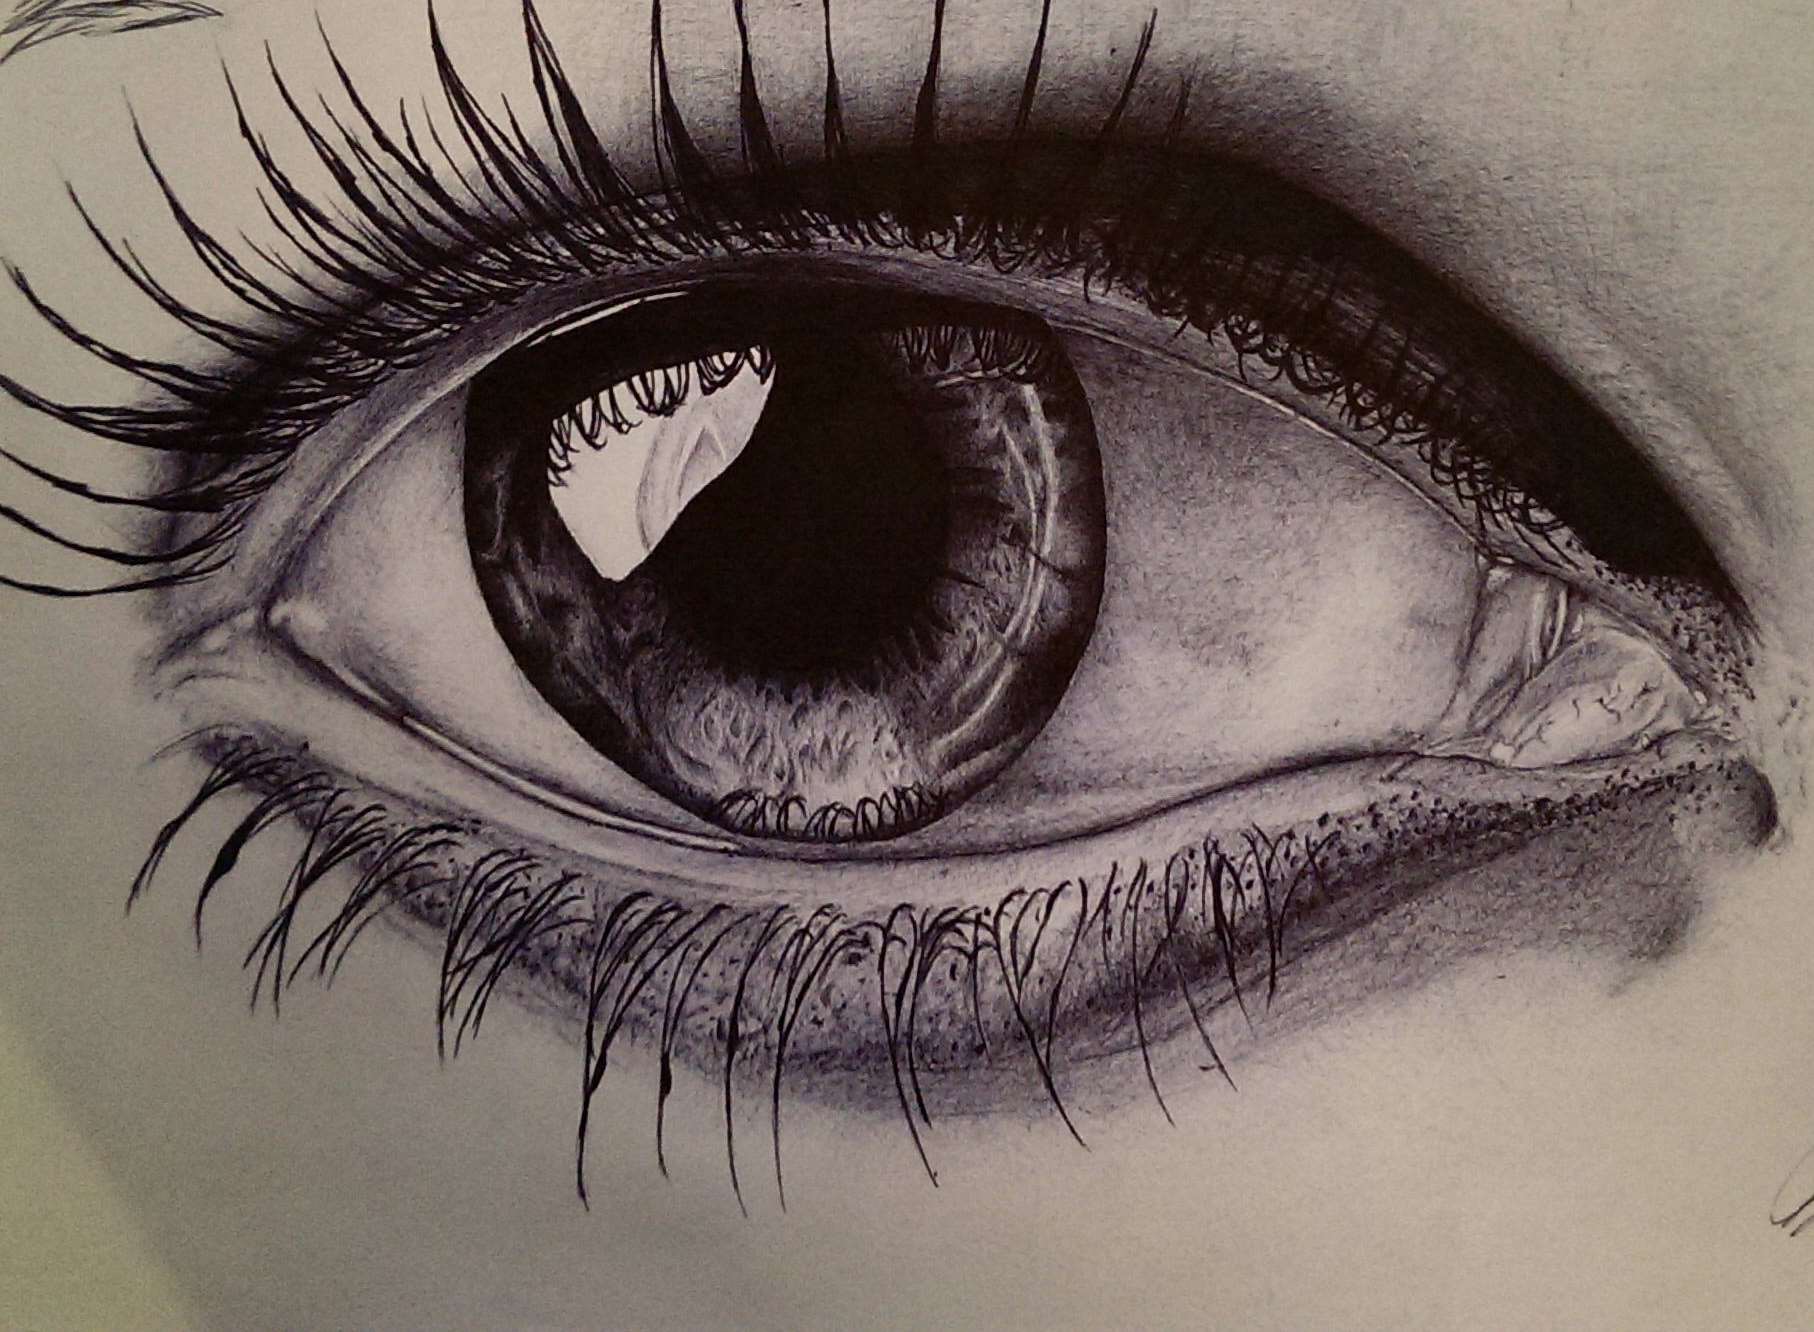 Ross captures incredible detail with a simple biro pen